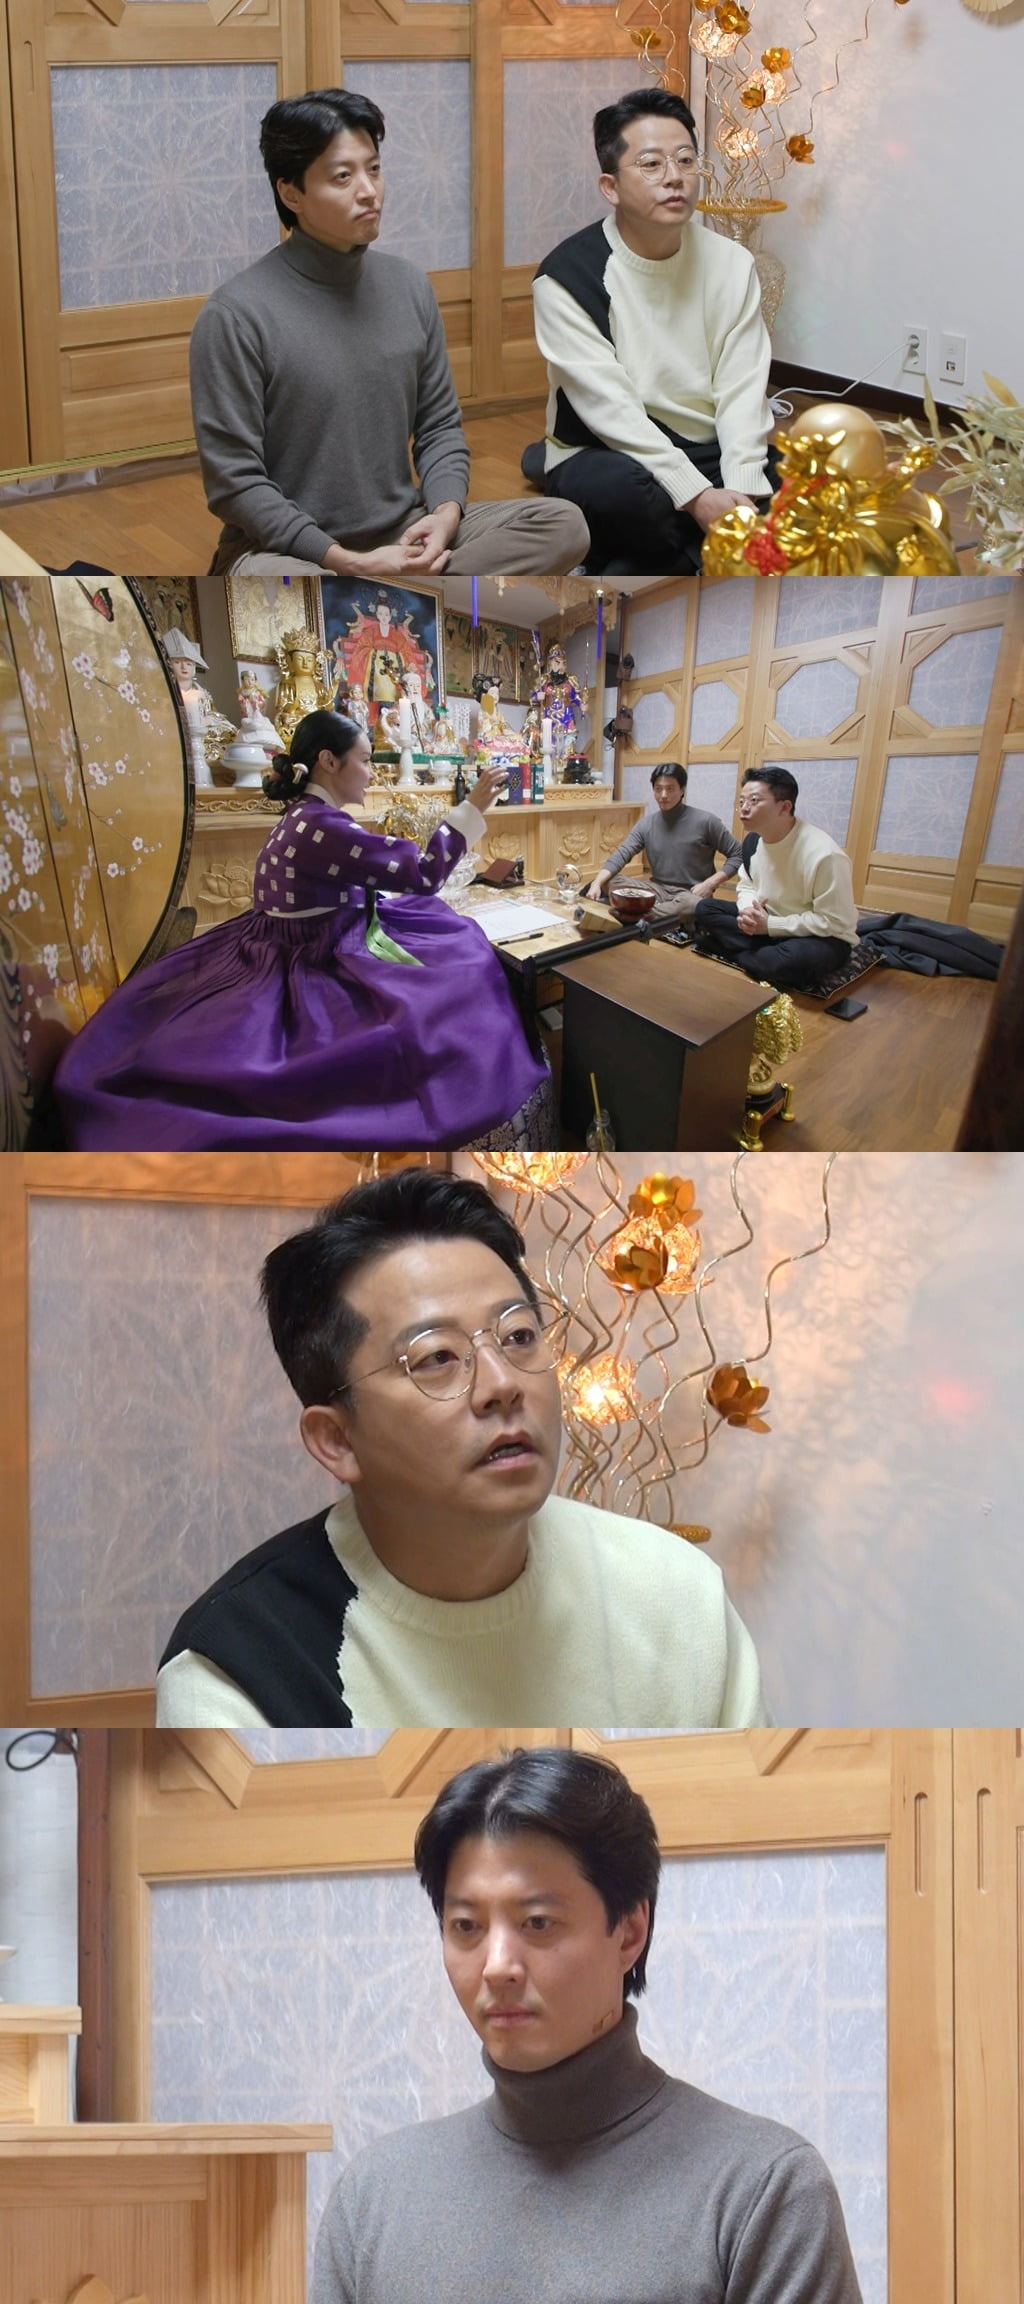 Kim Jun-ho, "I'm lucky to get married this fall and have children" Shocking compatibility with Kim Ji-min